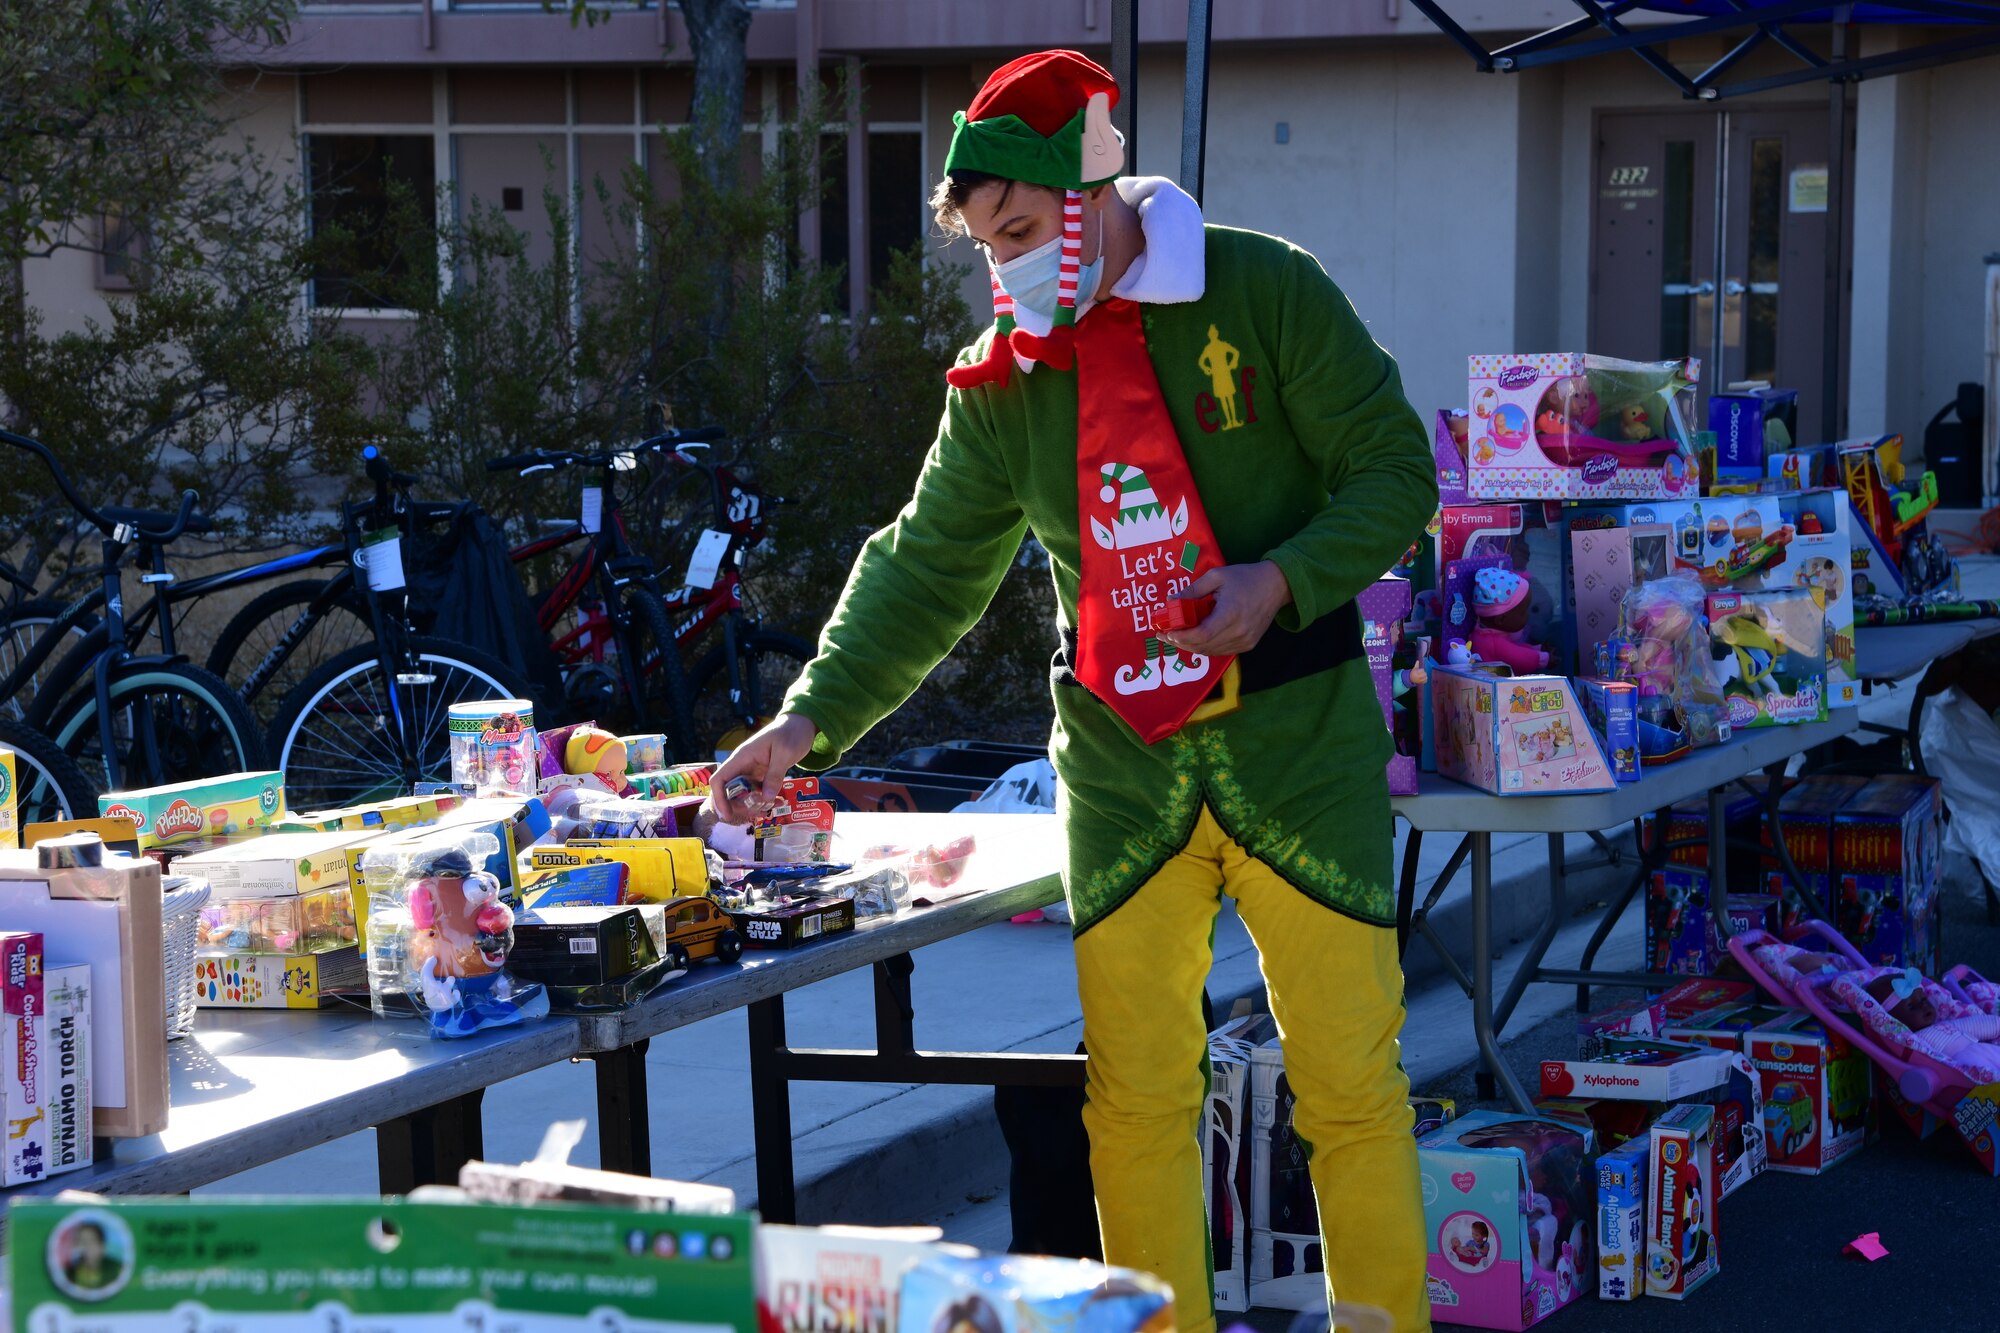 Santa's elf, Tech. Sgt. Charles Shaw, 926th Wing volunteer, is getting into the spirit while organizing and displaying everything to prepare for the 926th Wing Airman and Family Readiness Operation Holiday Hope event, Dec. 5, 2020 at Nellis Air Force Base, Nev. (U.S. Air Force photo by Staff Sgt. Paige Yenke)